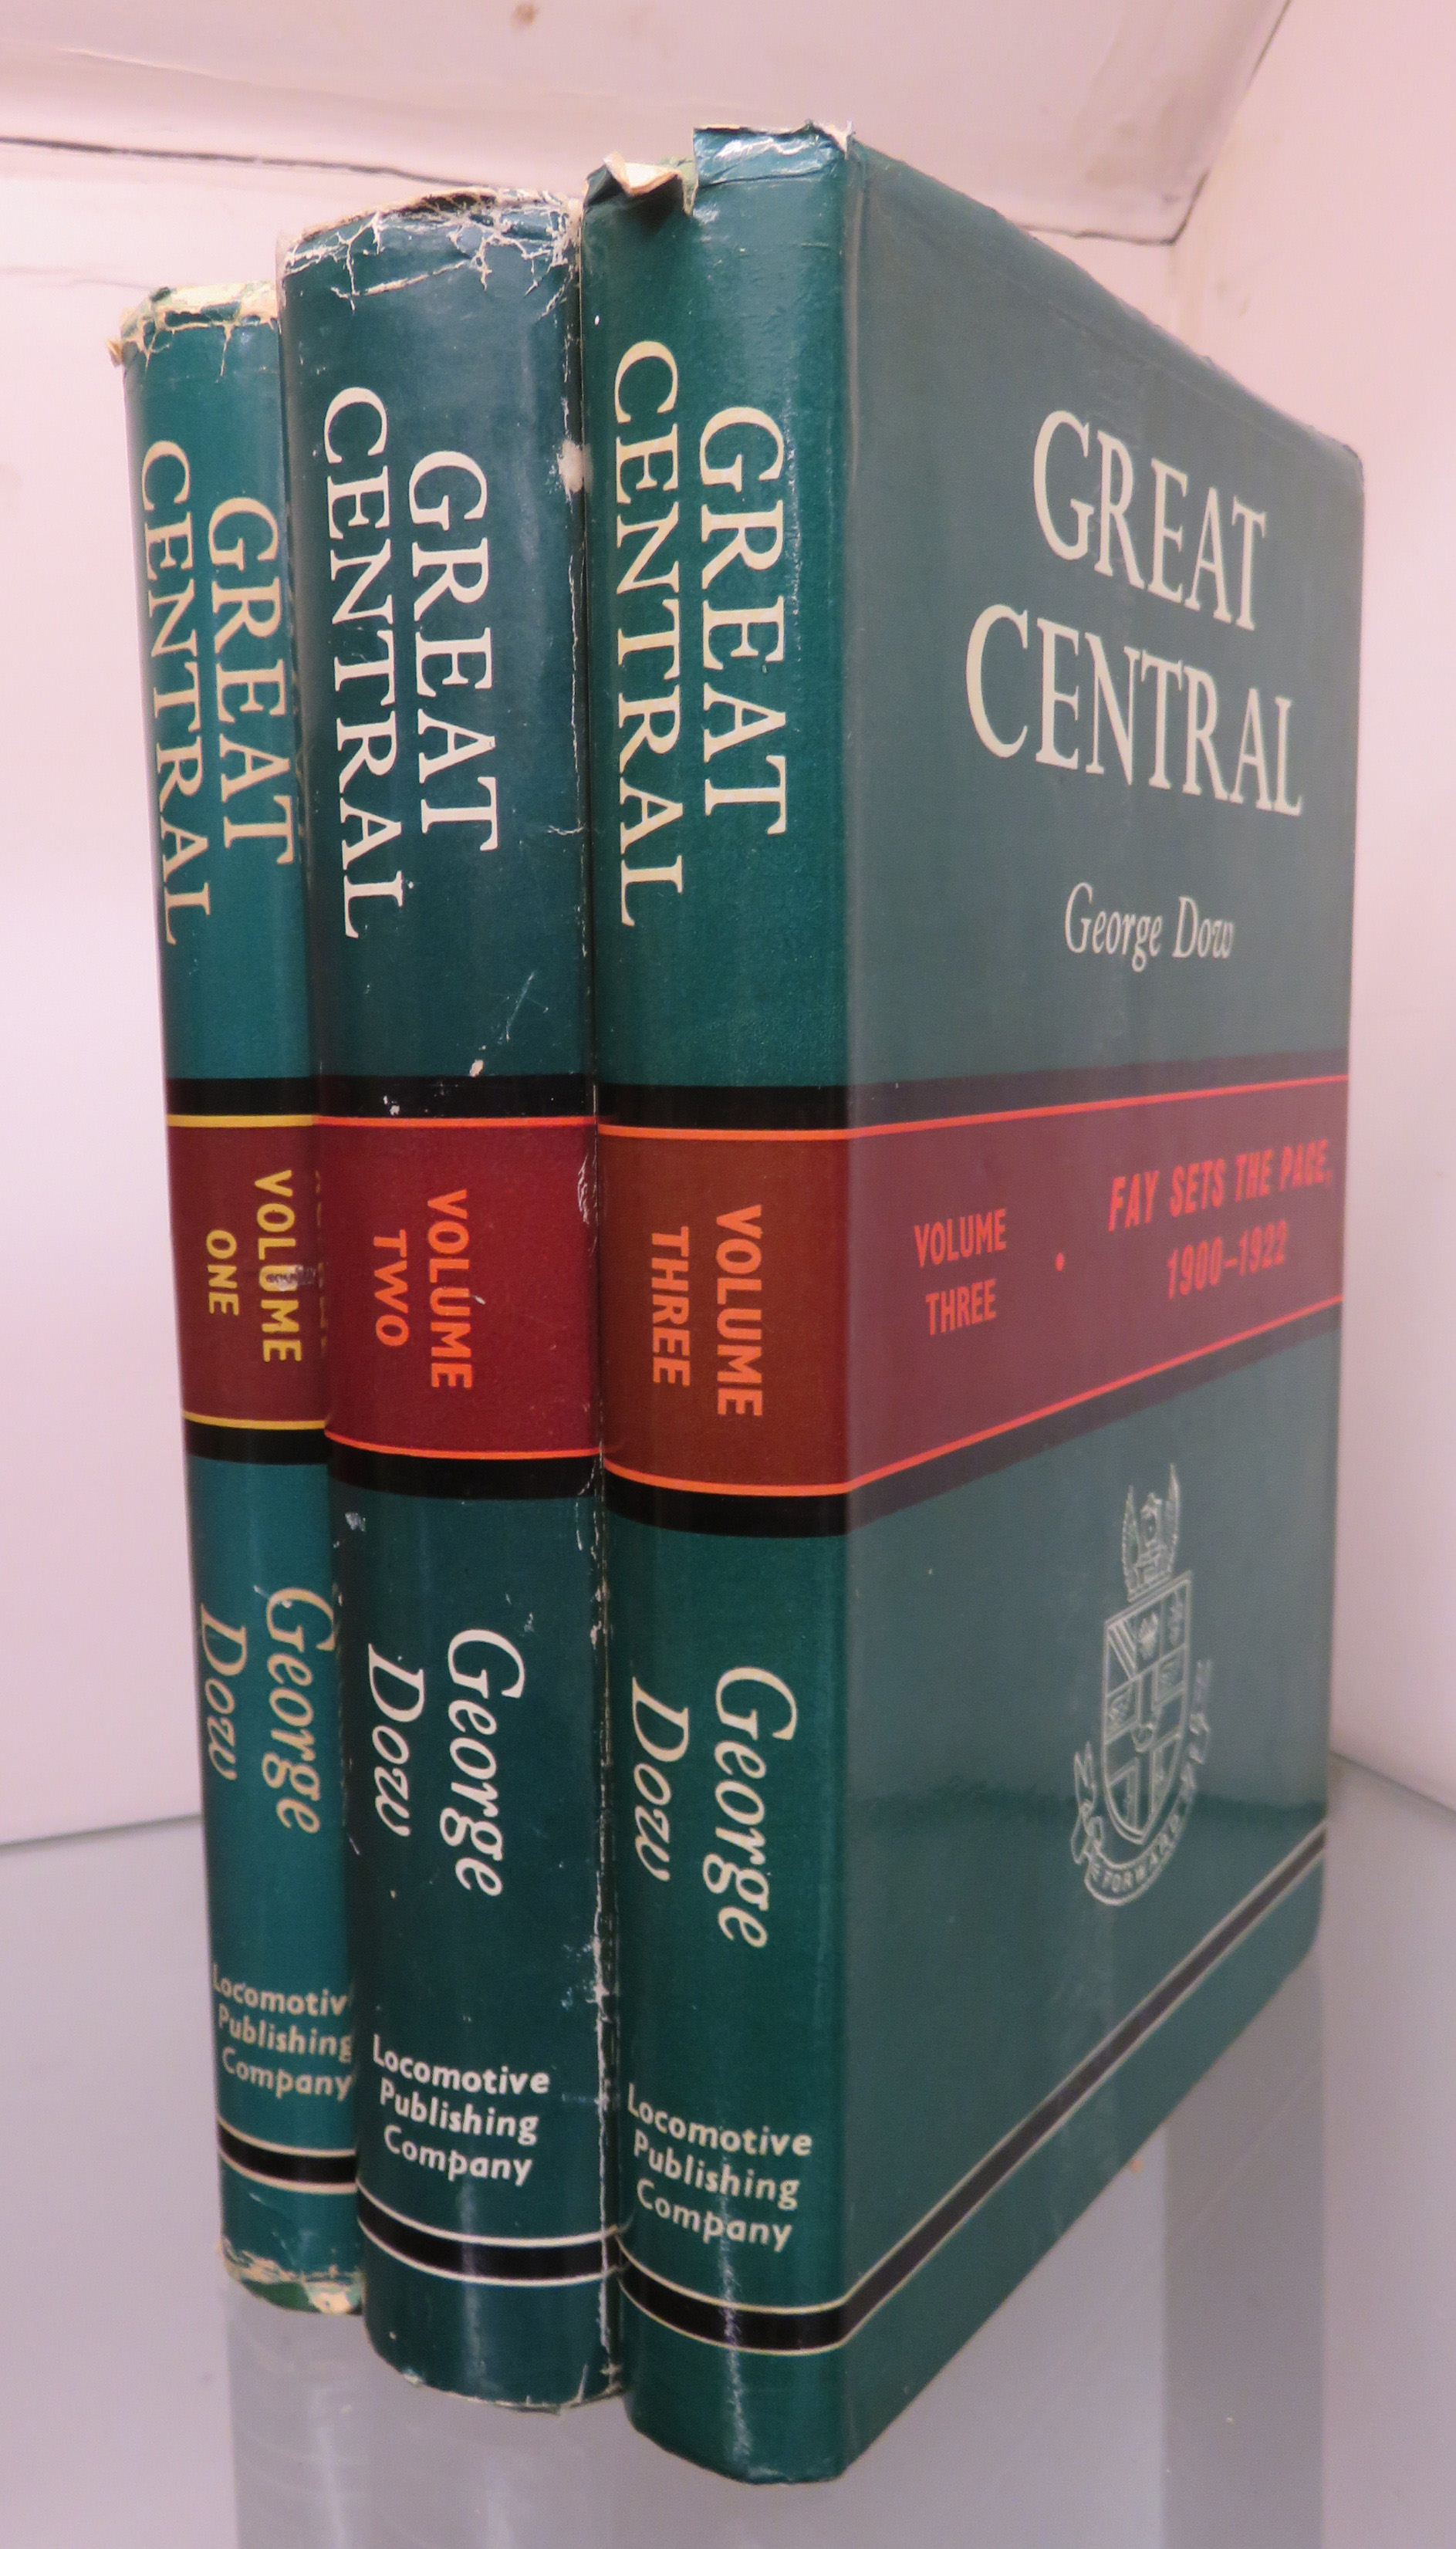 Great Central Three Volumes